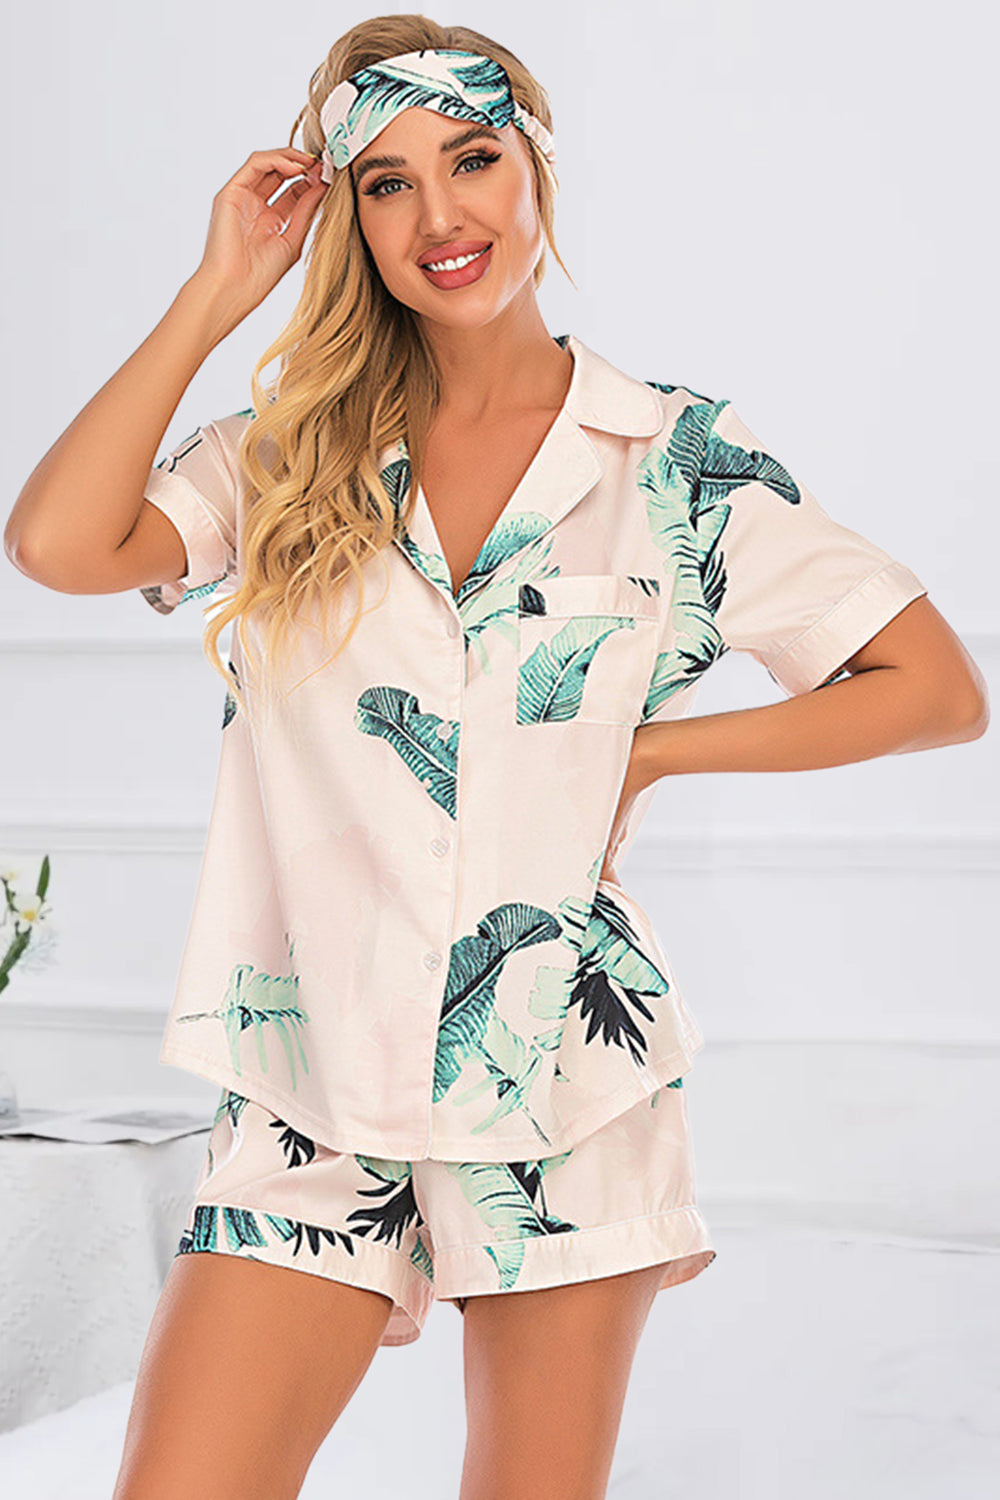 Printed Button Up Short Sleeve Top and Shorts Lounge Set - House of Binx 